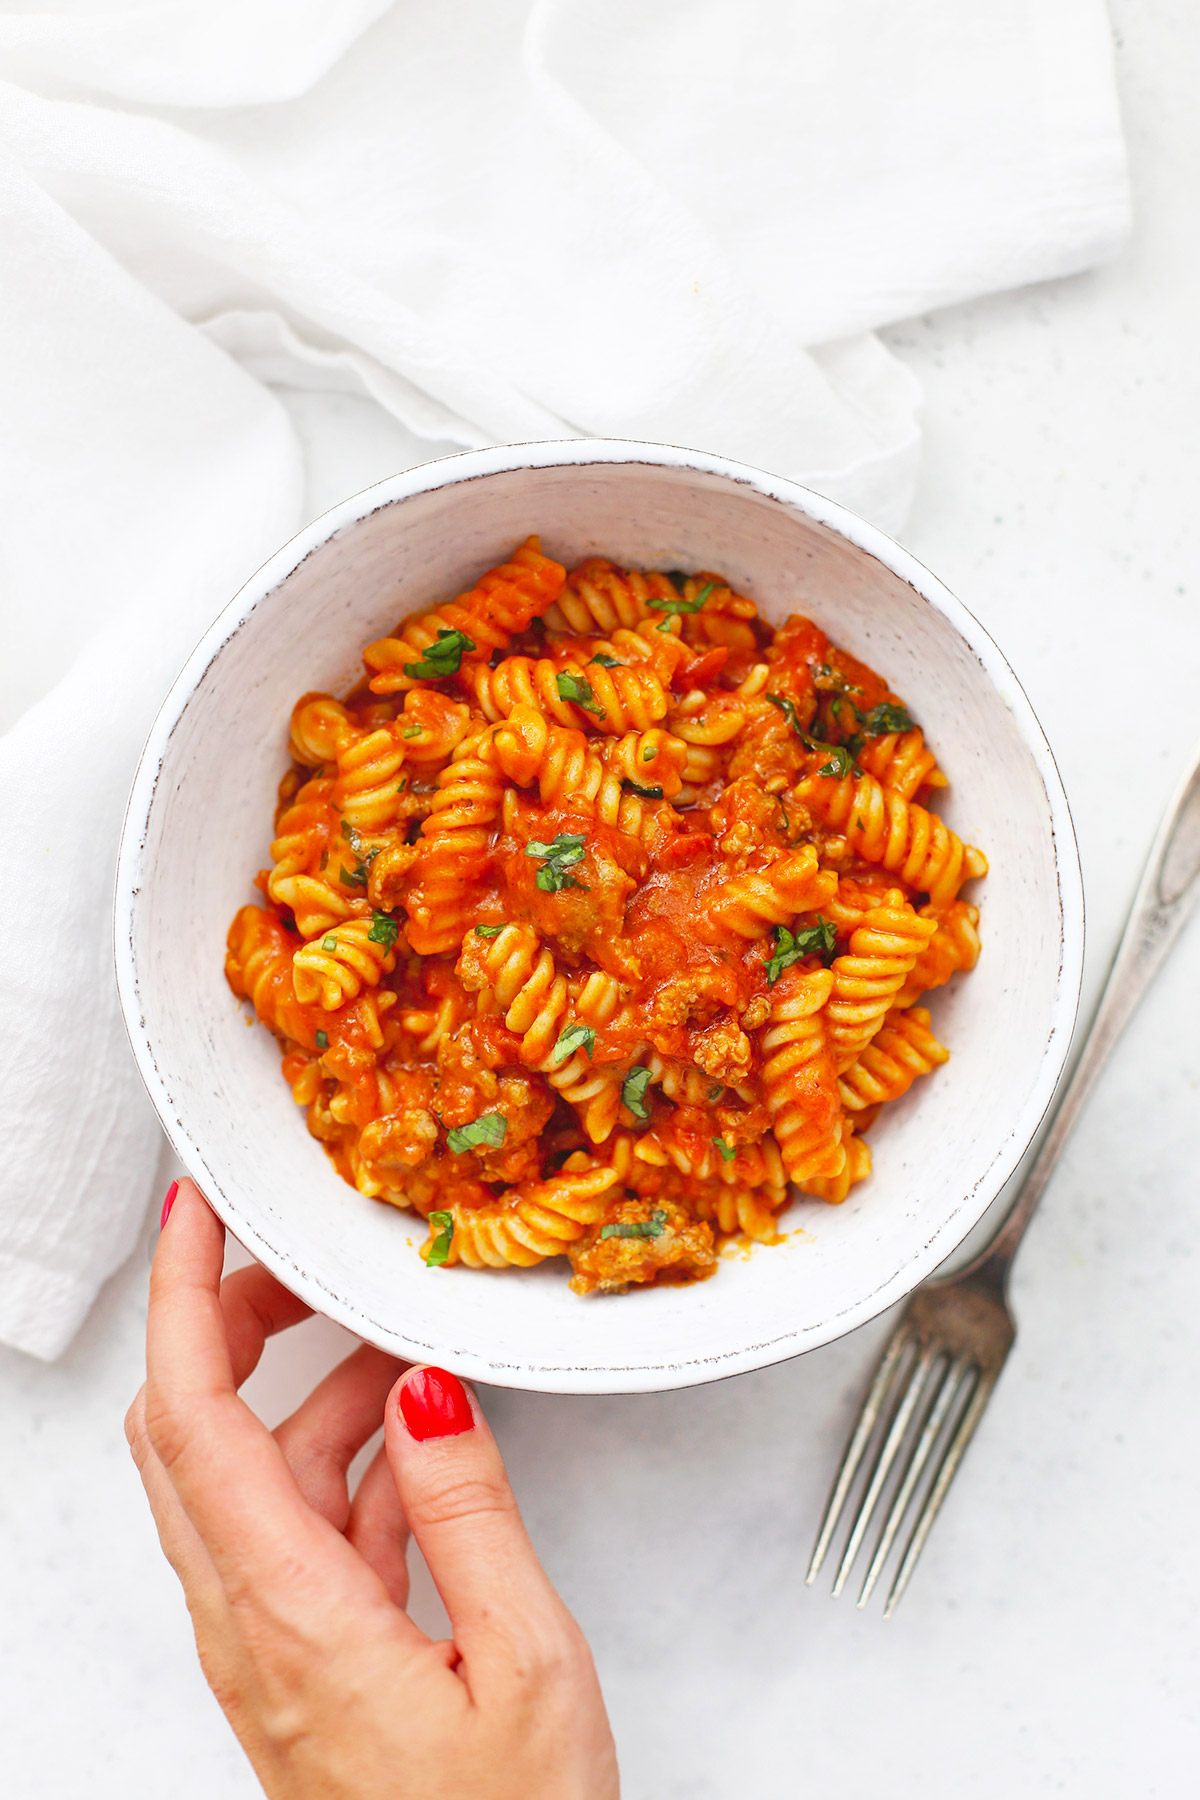 Instant Pot Gluten Free Pasta with Marinara Sauce and Sausage from One Lovely Life